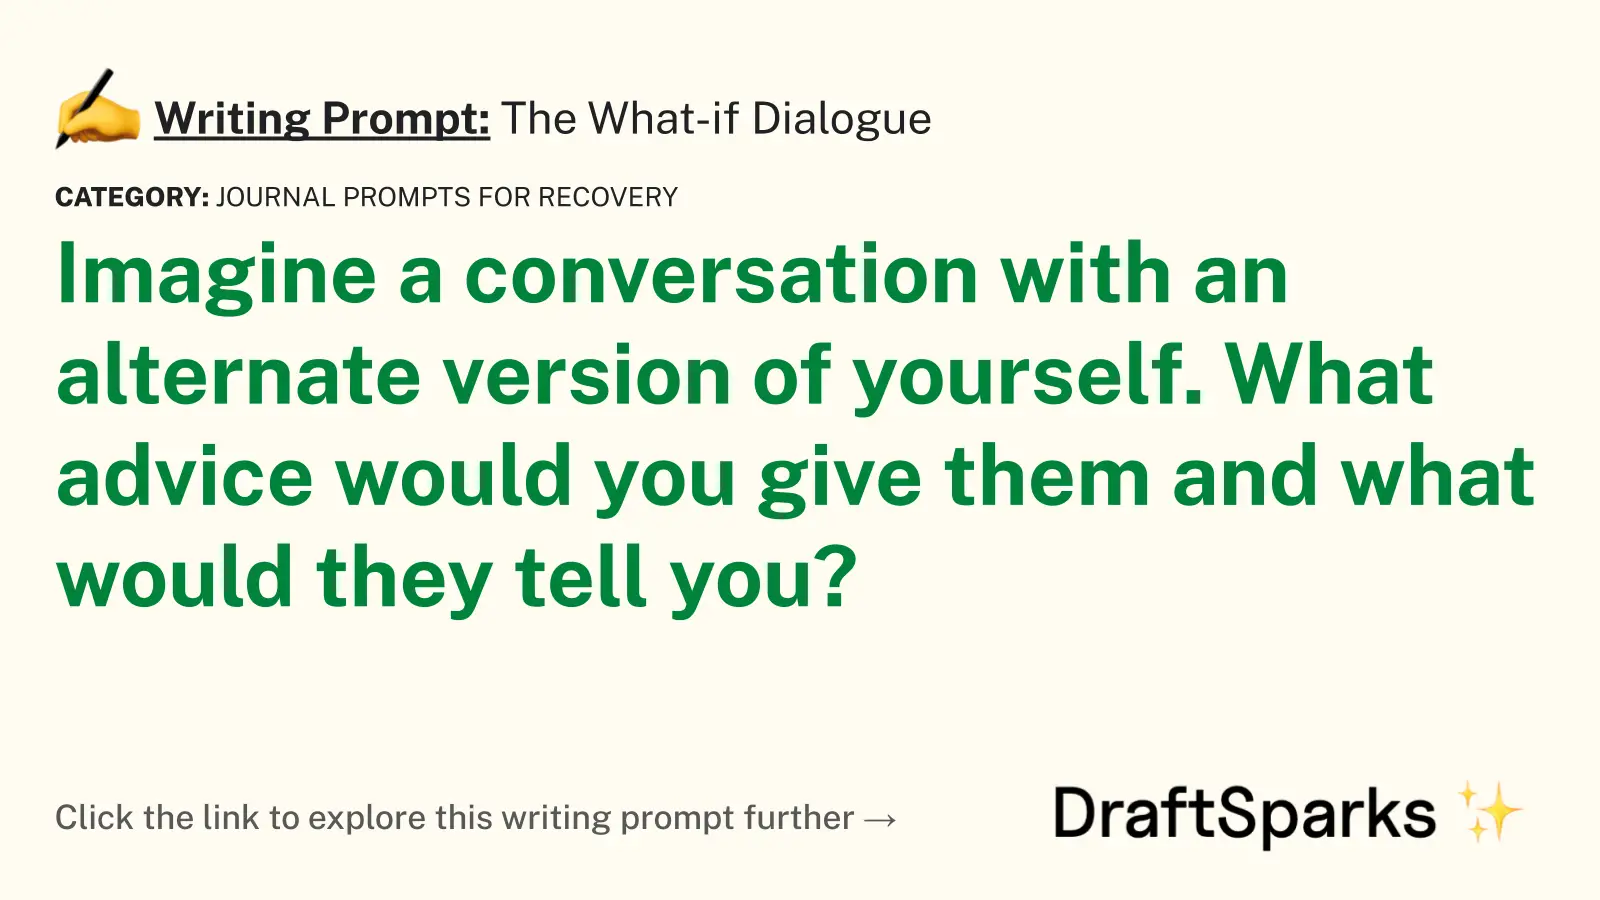 The What-if Dialogue